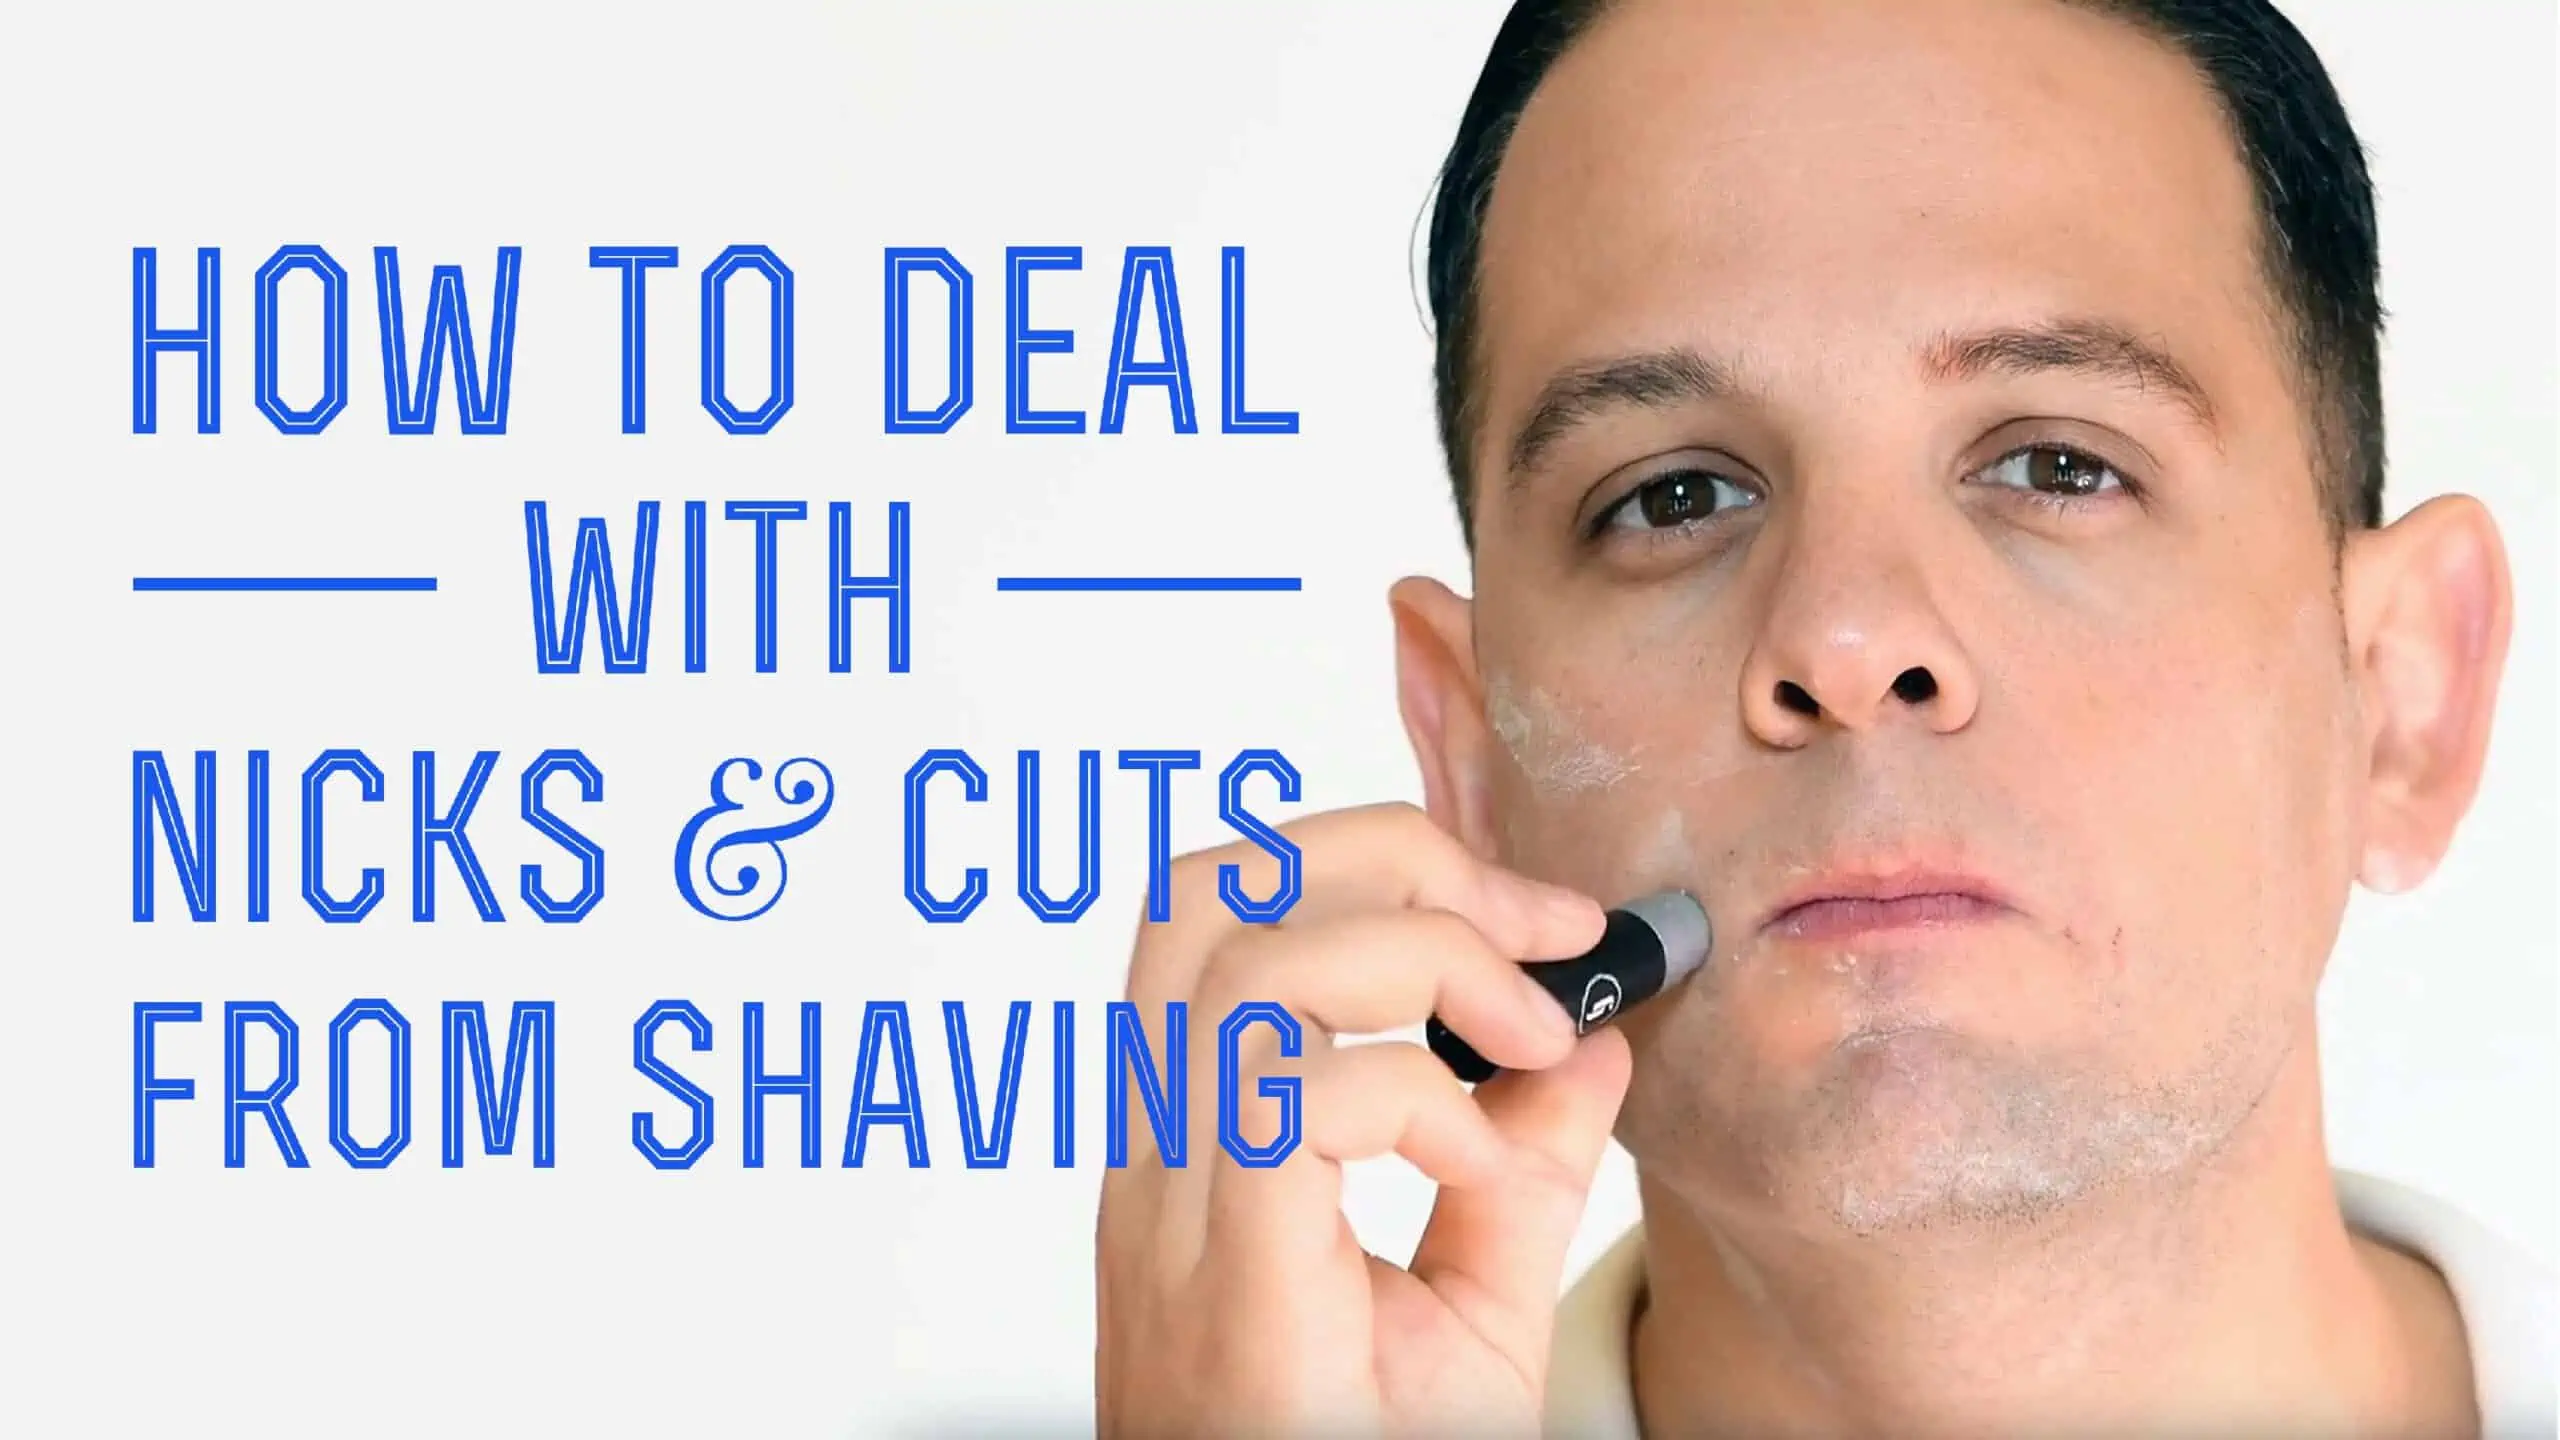 How To Deal With Nicks & Cuts From Shaving